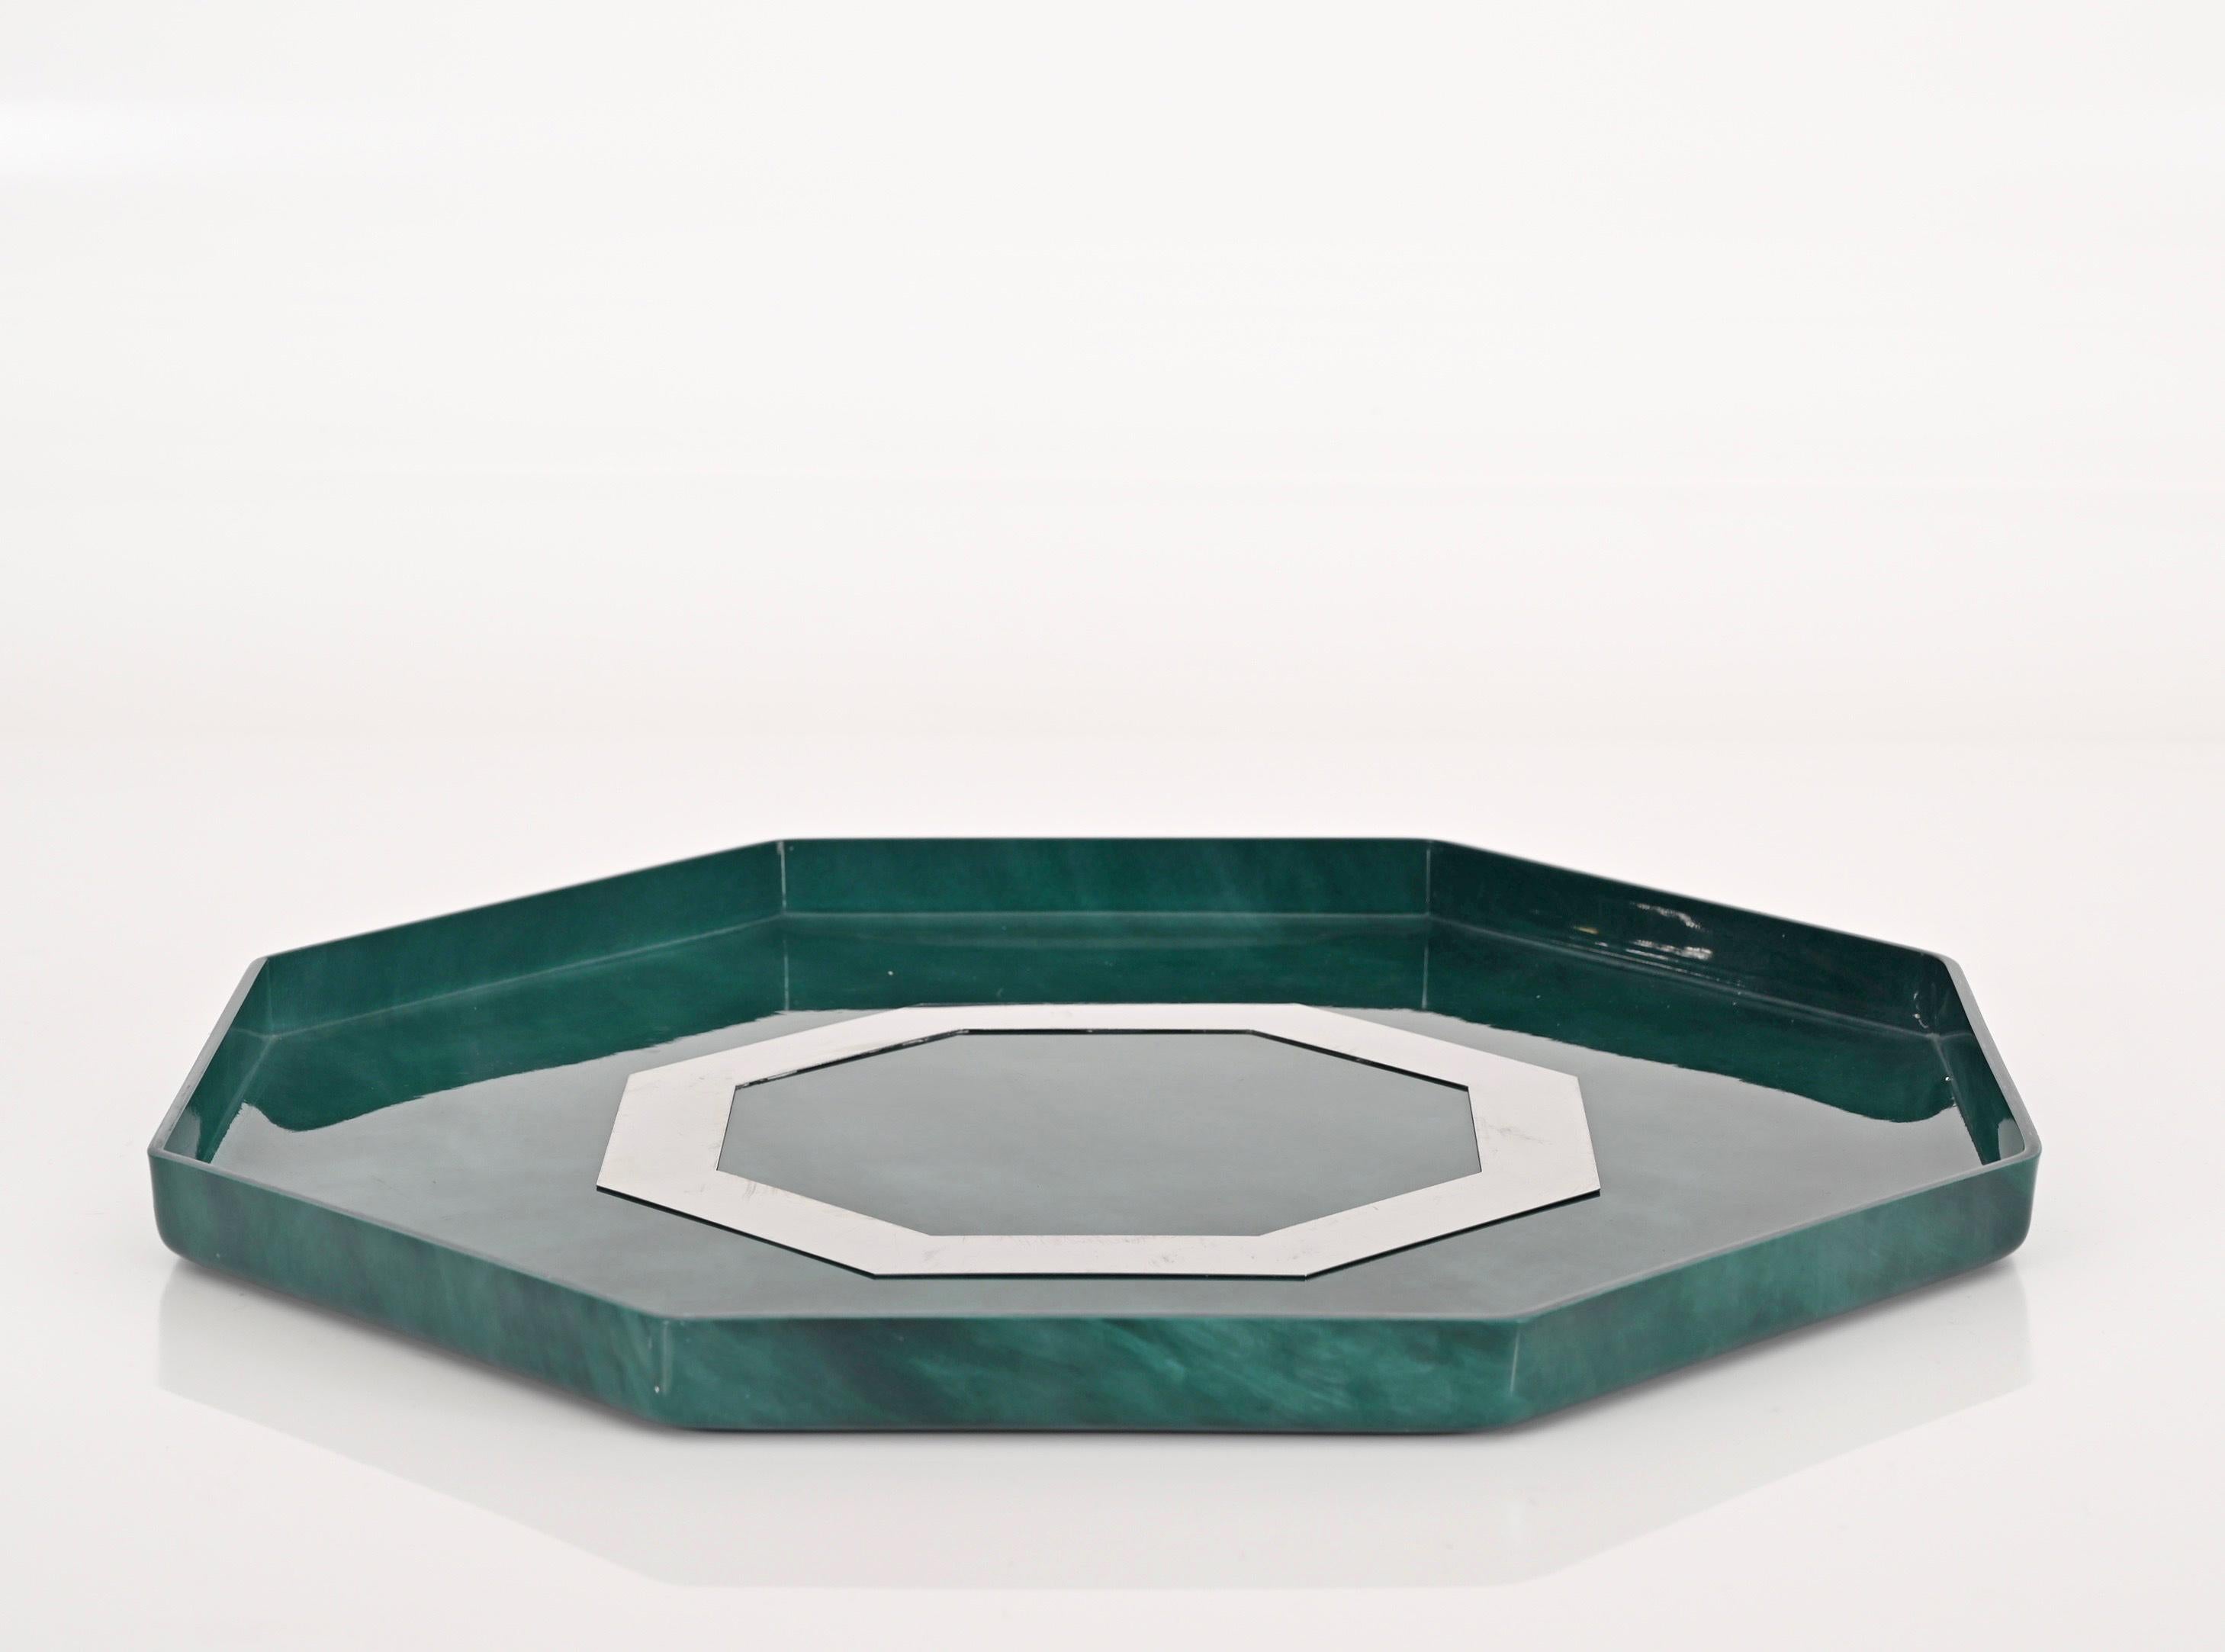 Midcentury Marble Effect Lucite and Steel Octagonal Serving Tray, Italy, 1980s For Sale 1